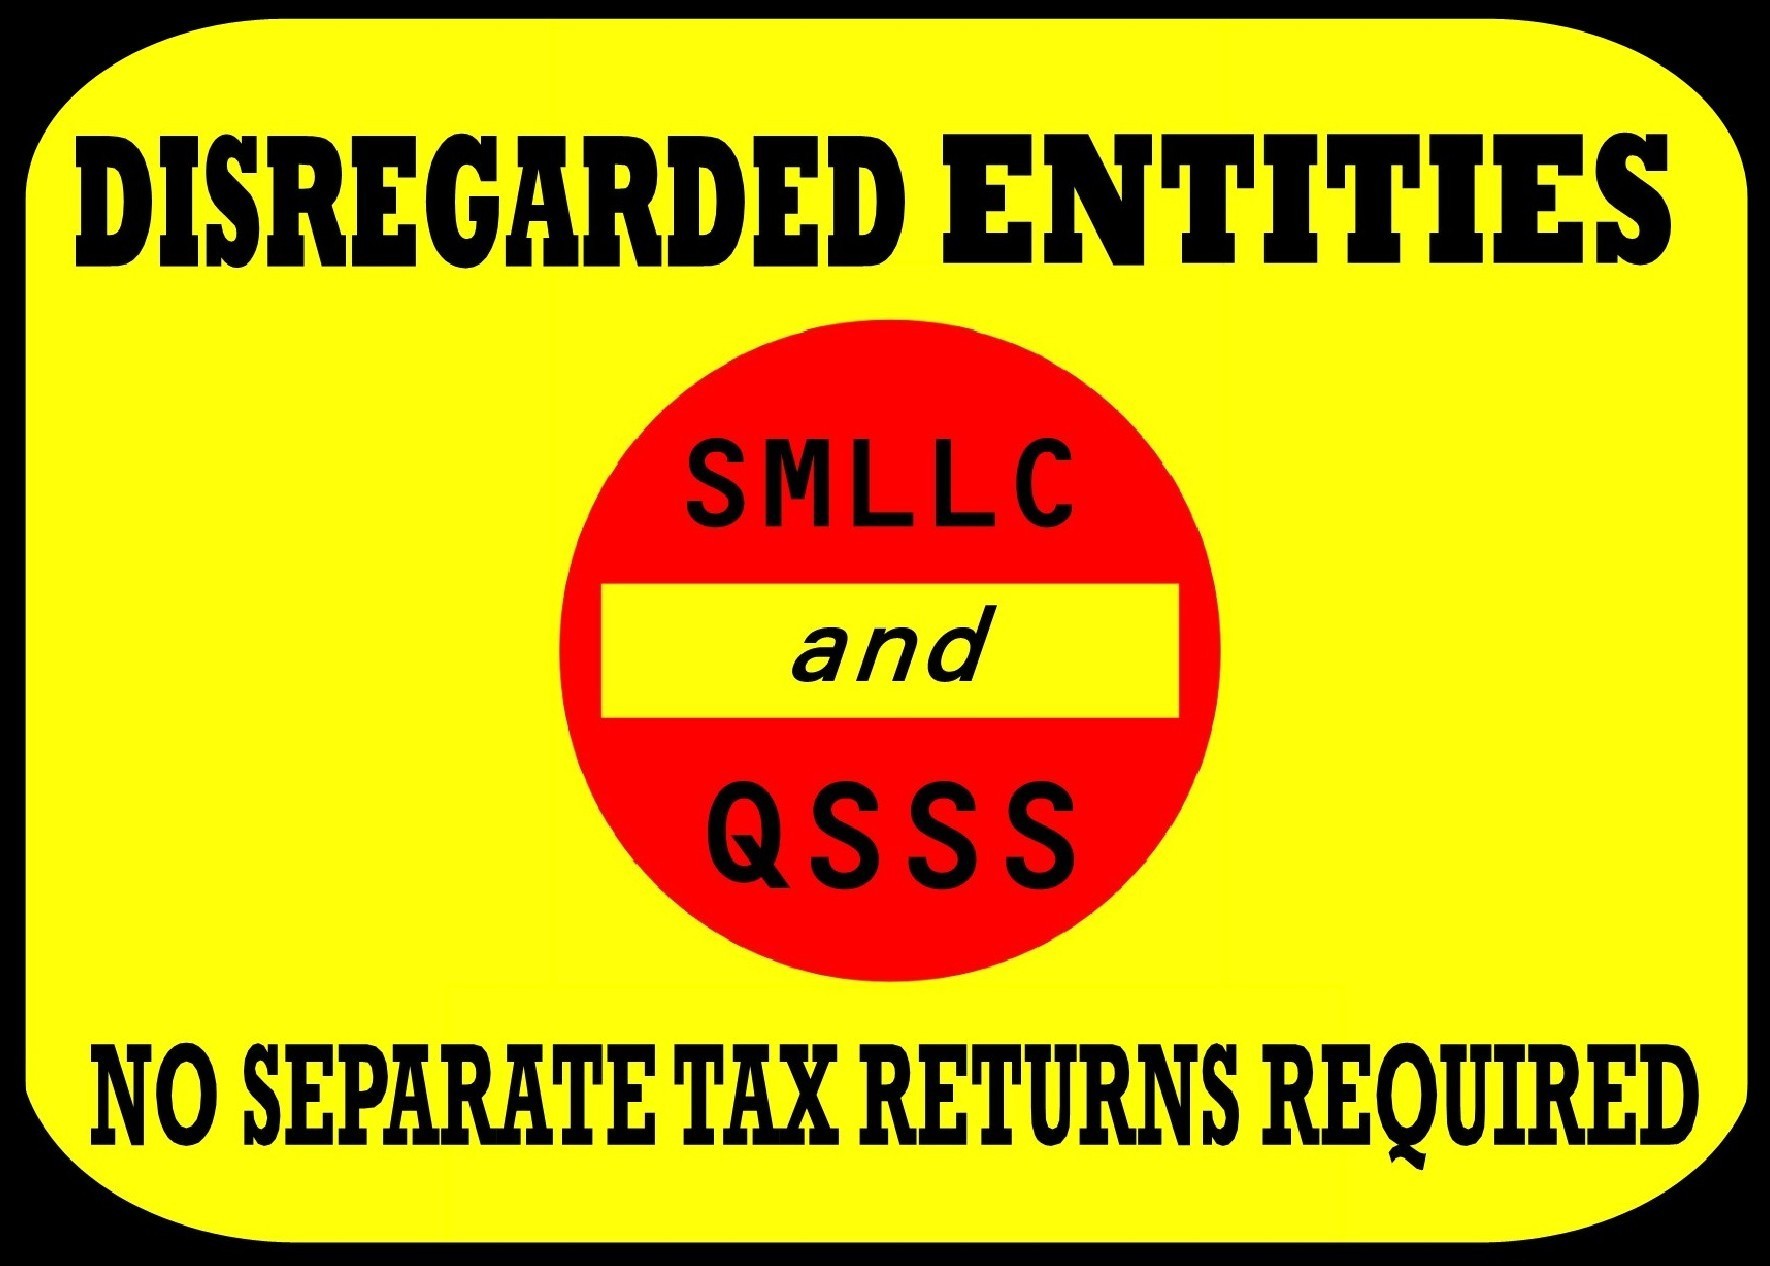 Tax Rules For Disregarded Entities, Single Member LLCs